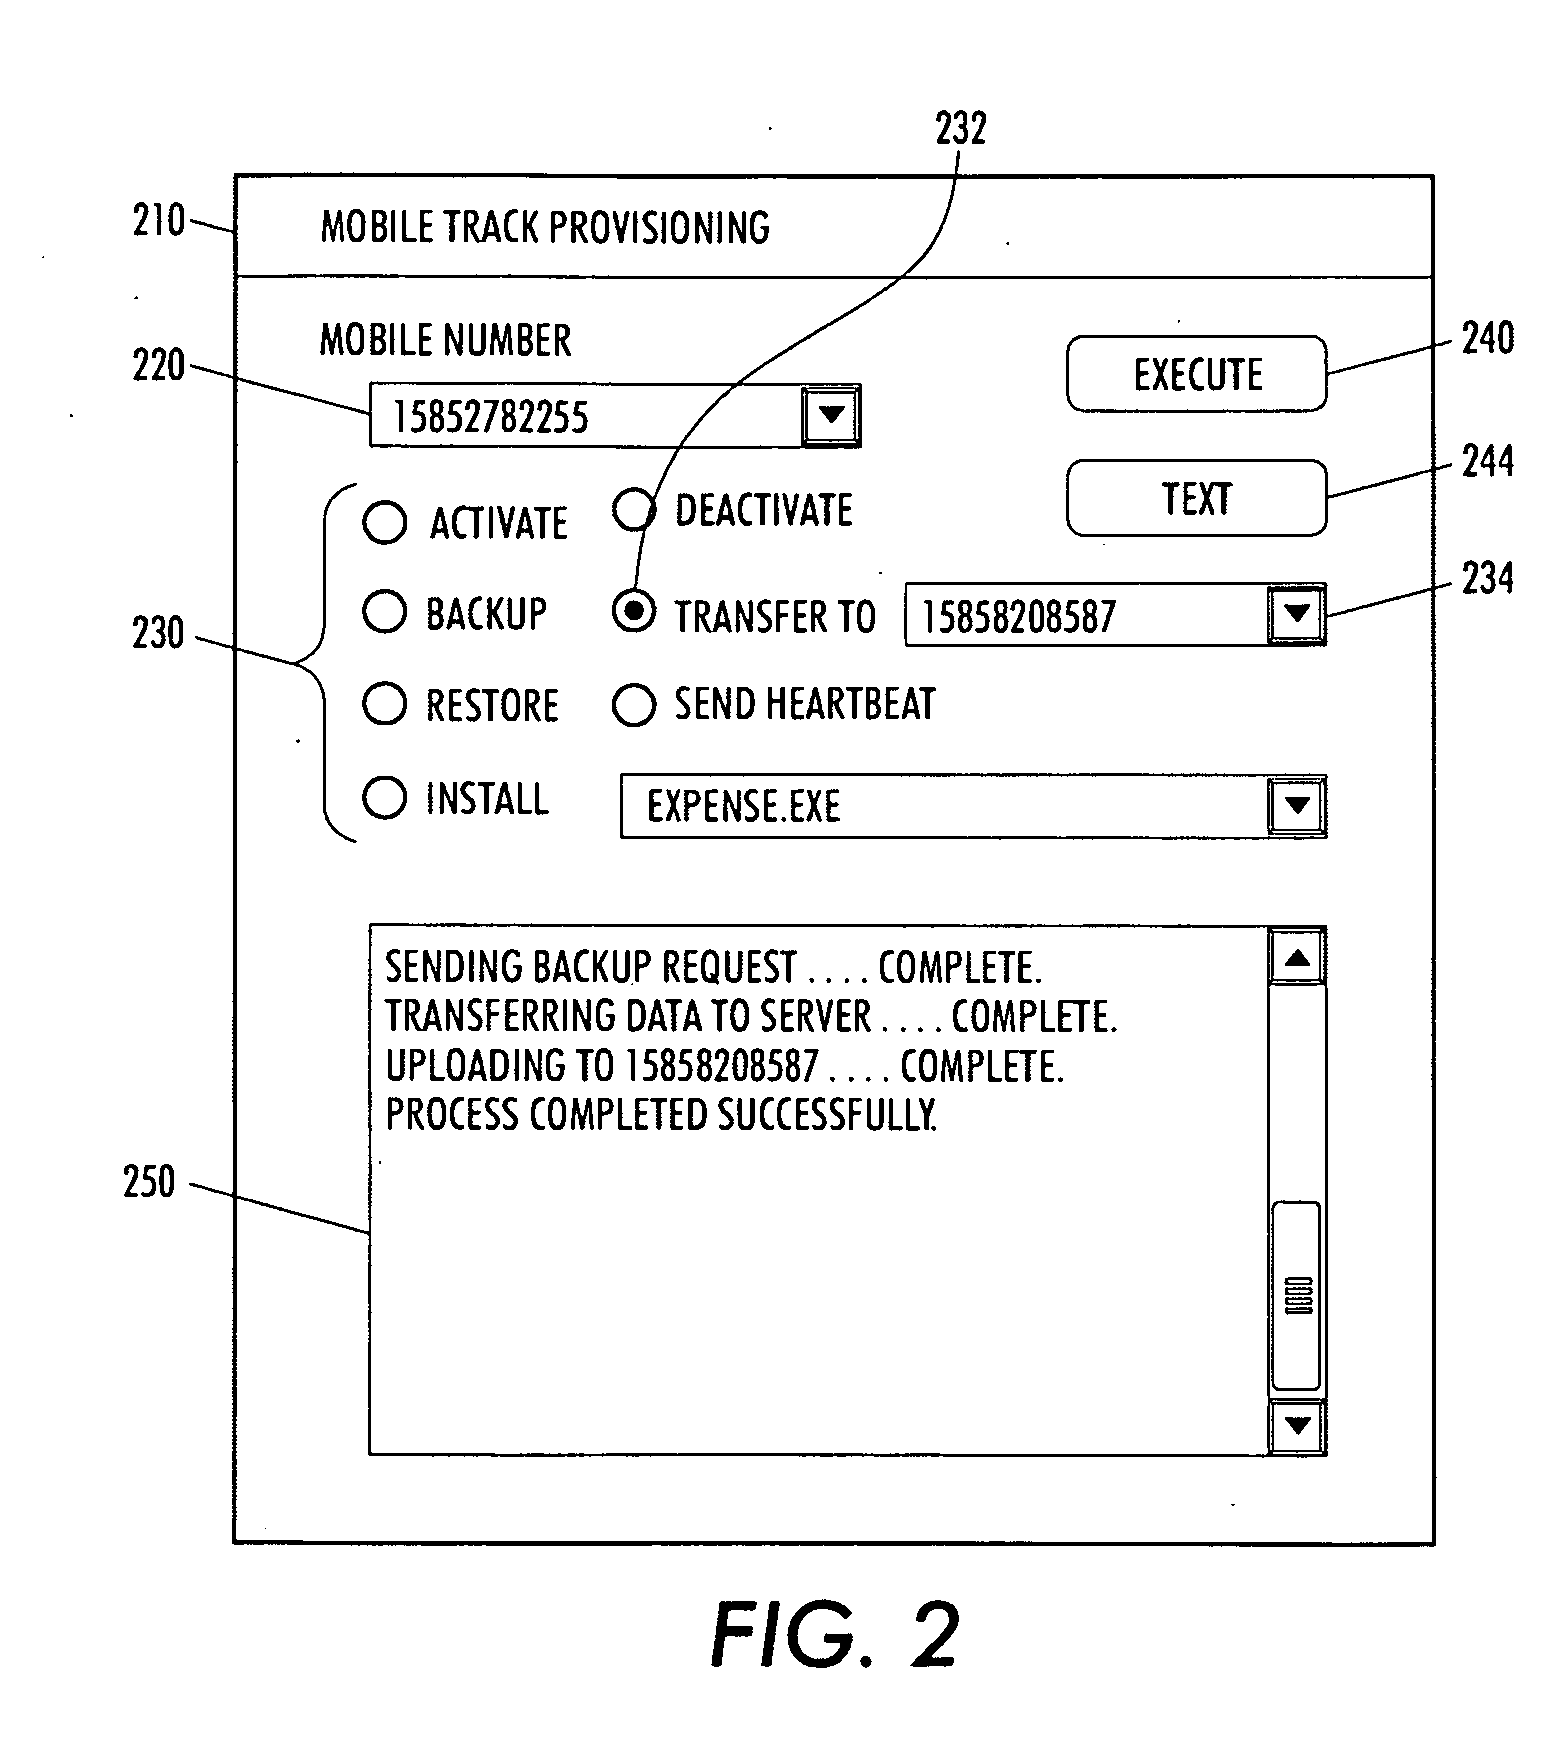 Mobile phone/device usage tracking system and method